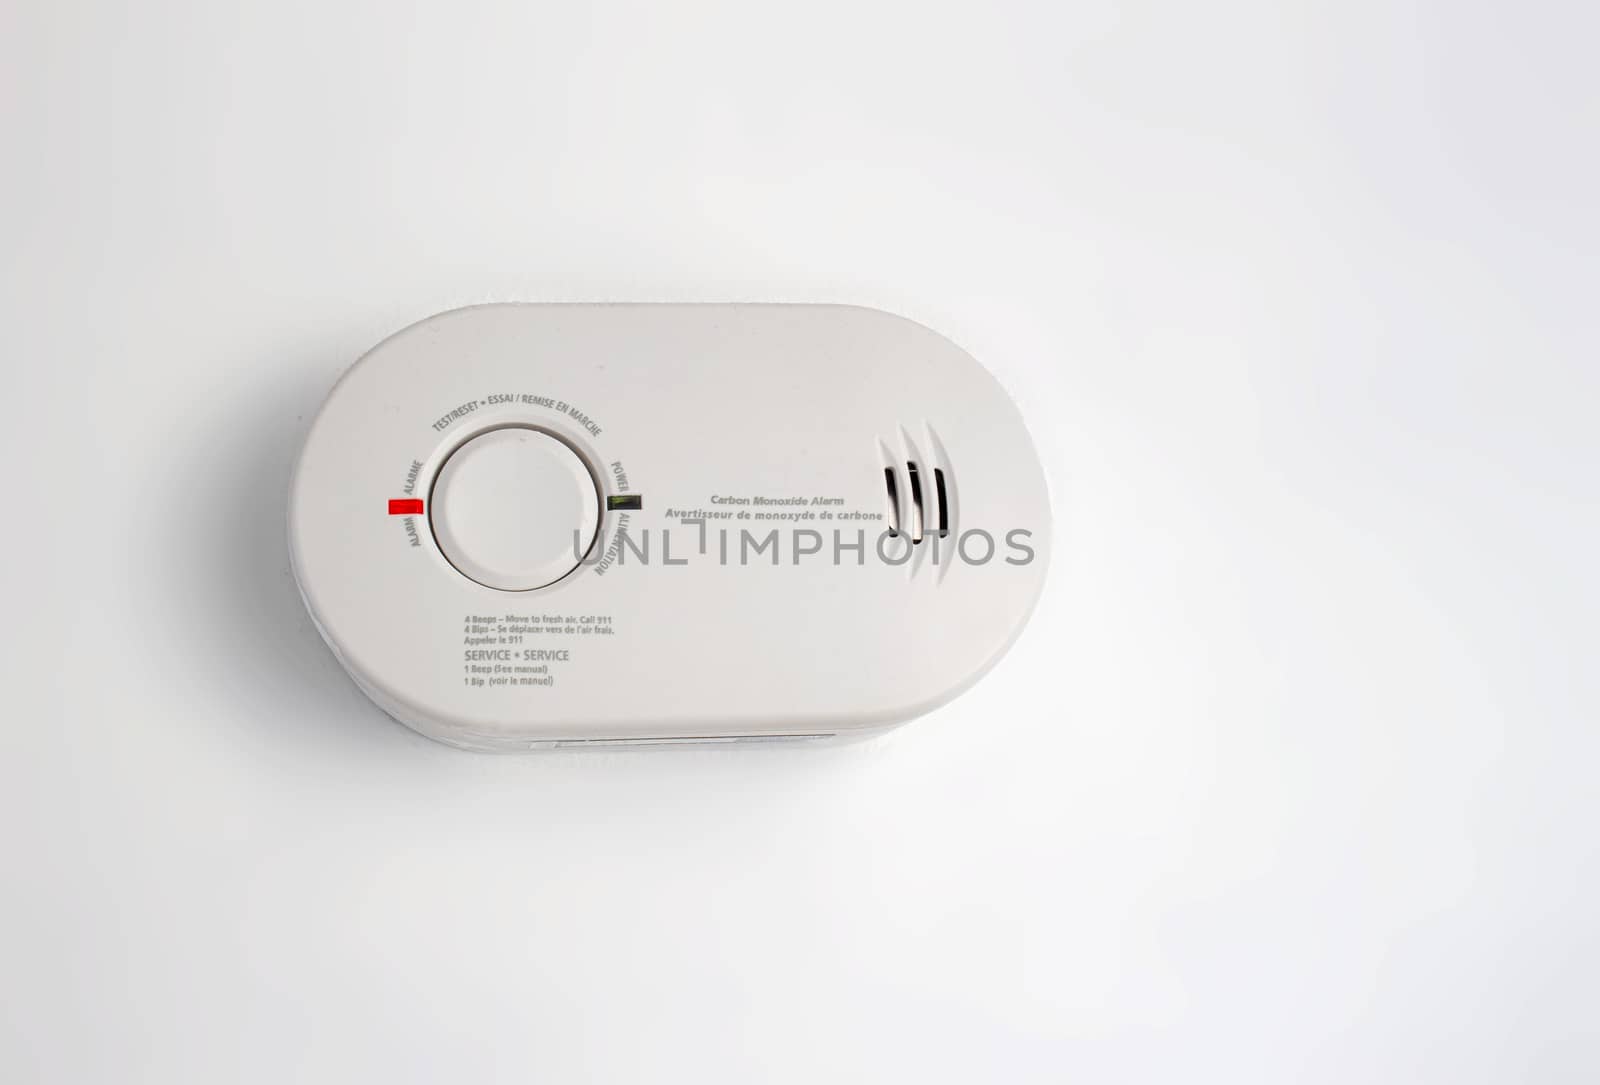 Carbon Monoxide Alarm with a red light Alarm by oasisamuel